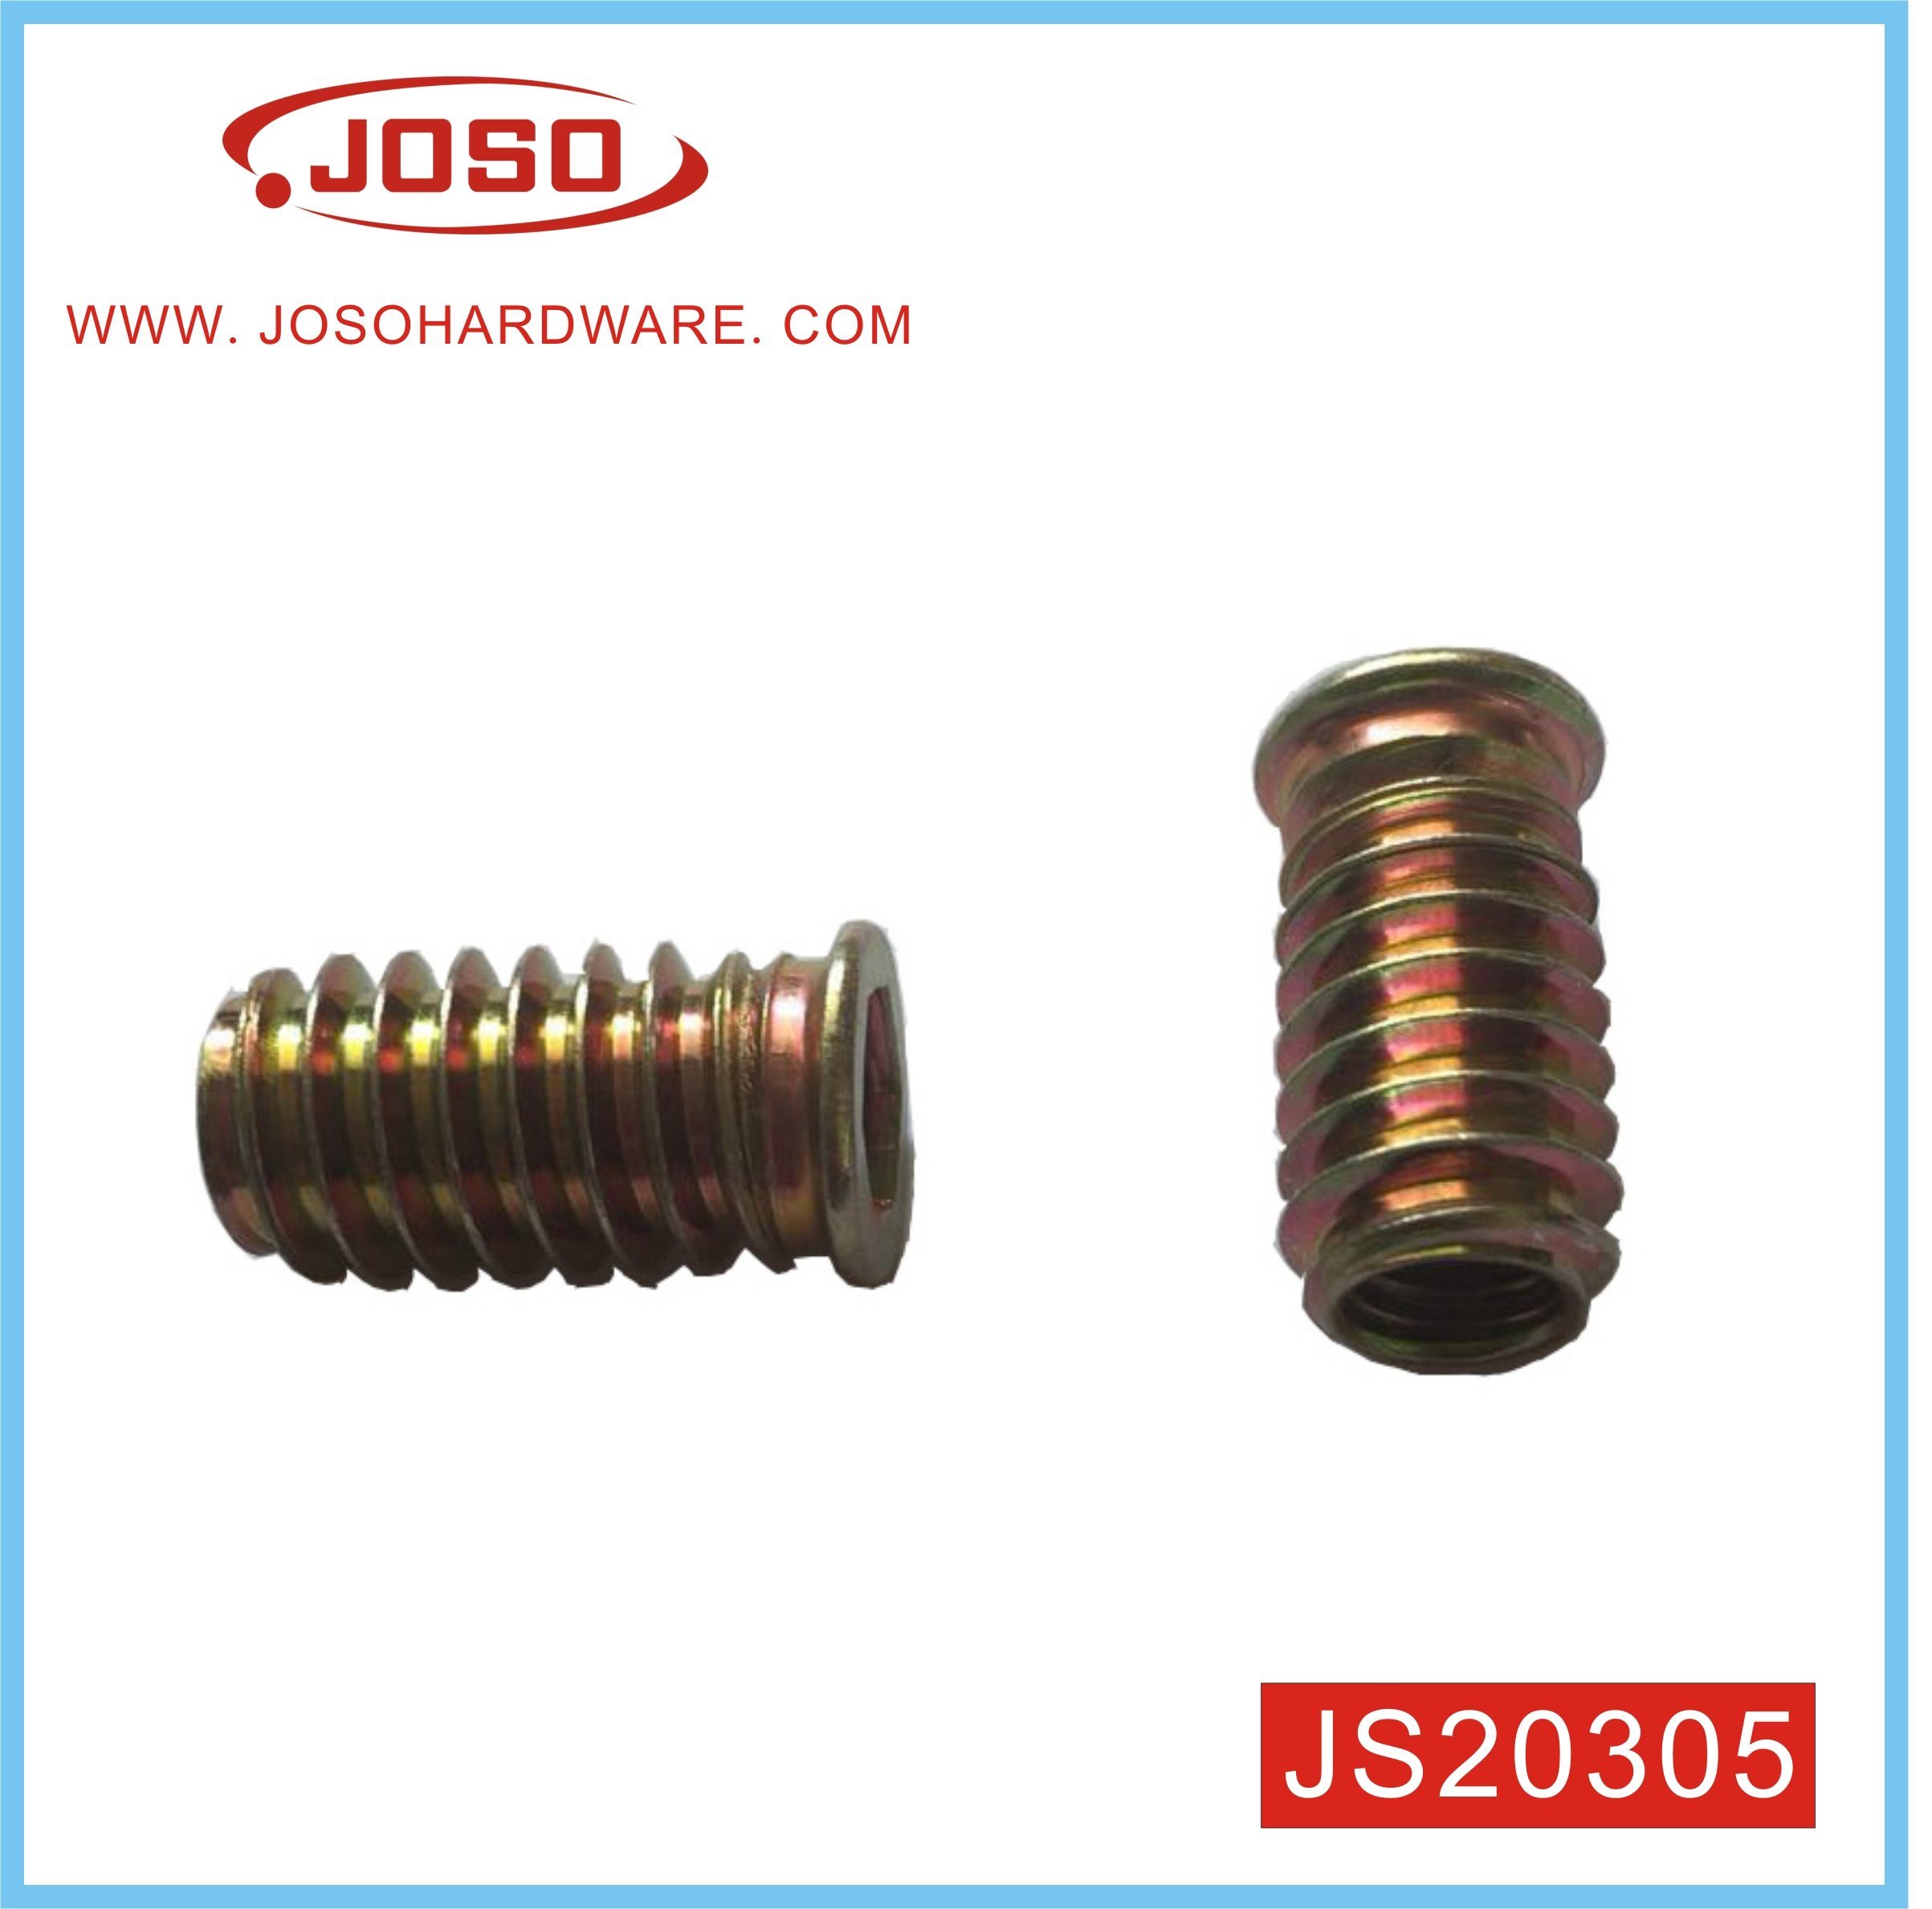 Hot Selling High Quality Metal Insert Nut for Wardrobe